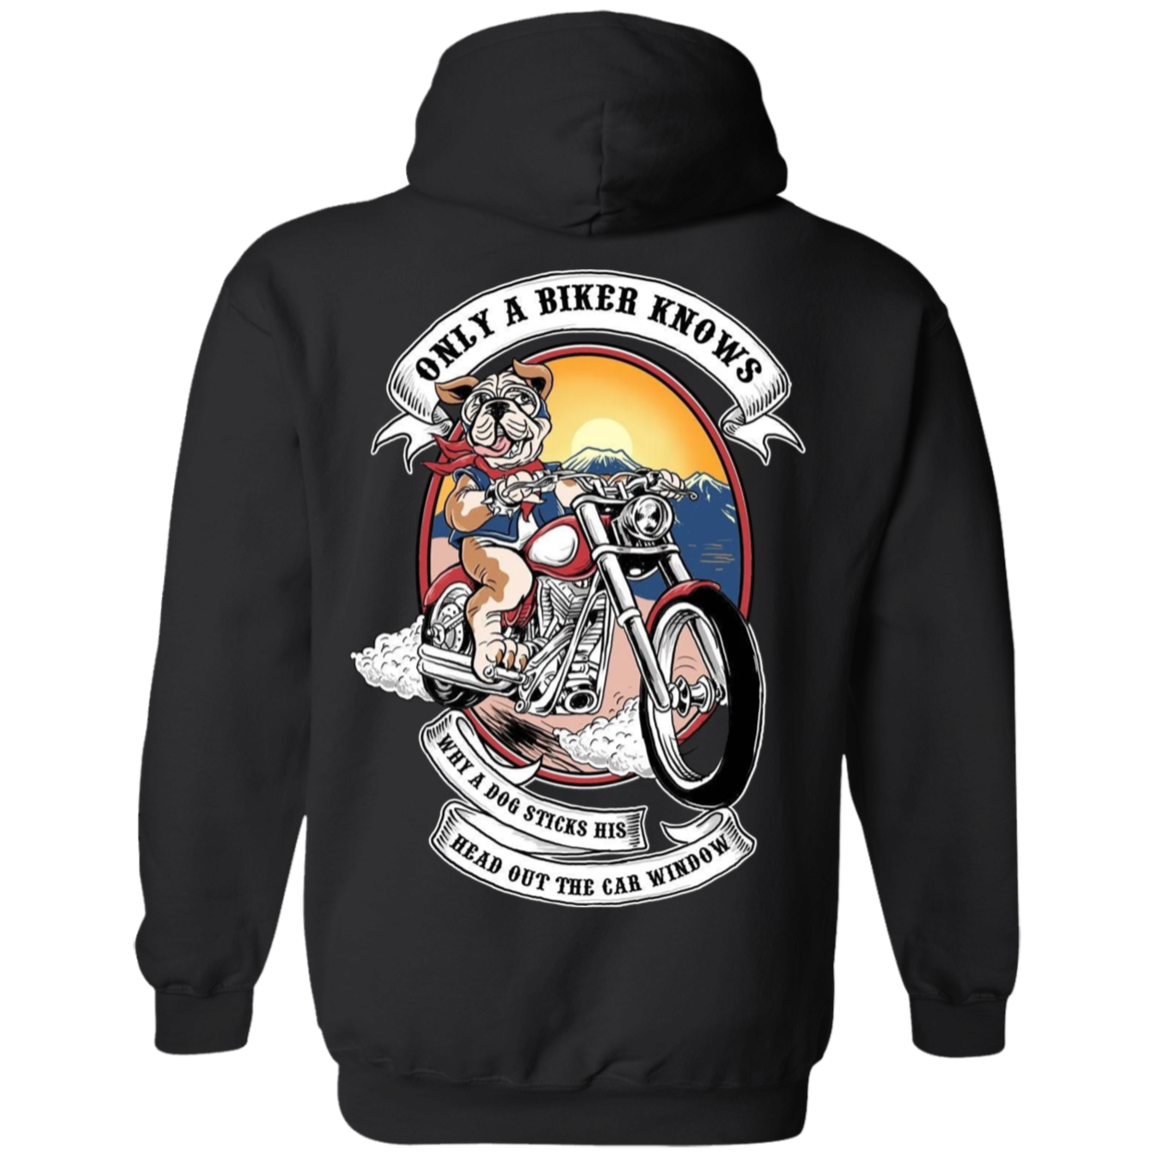 Only A Biker Knows Why A Dog Sticks His Head Out Of The Car Window Hoodie, Cotton/Polyester, Black